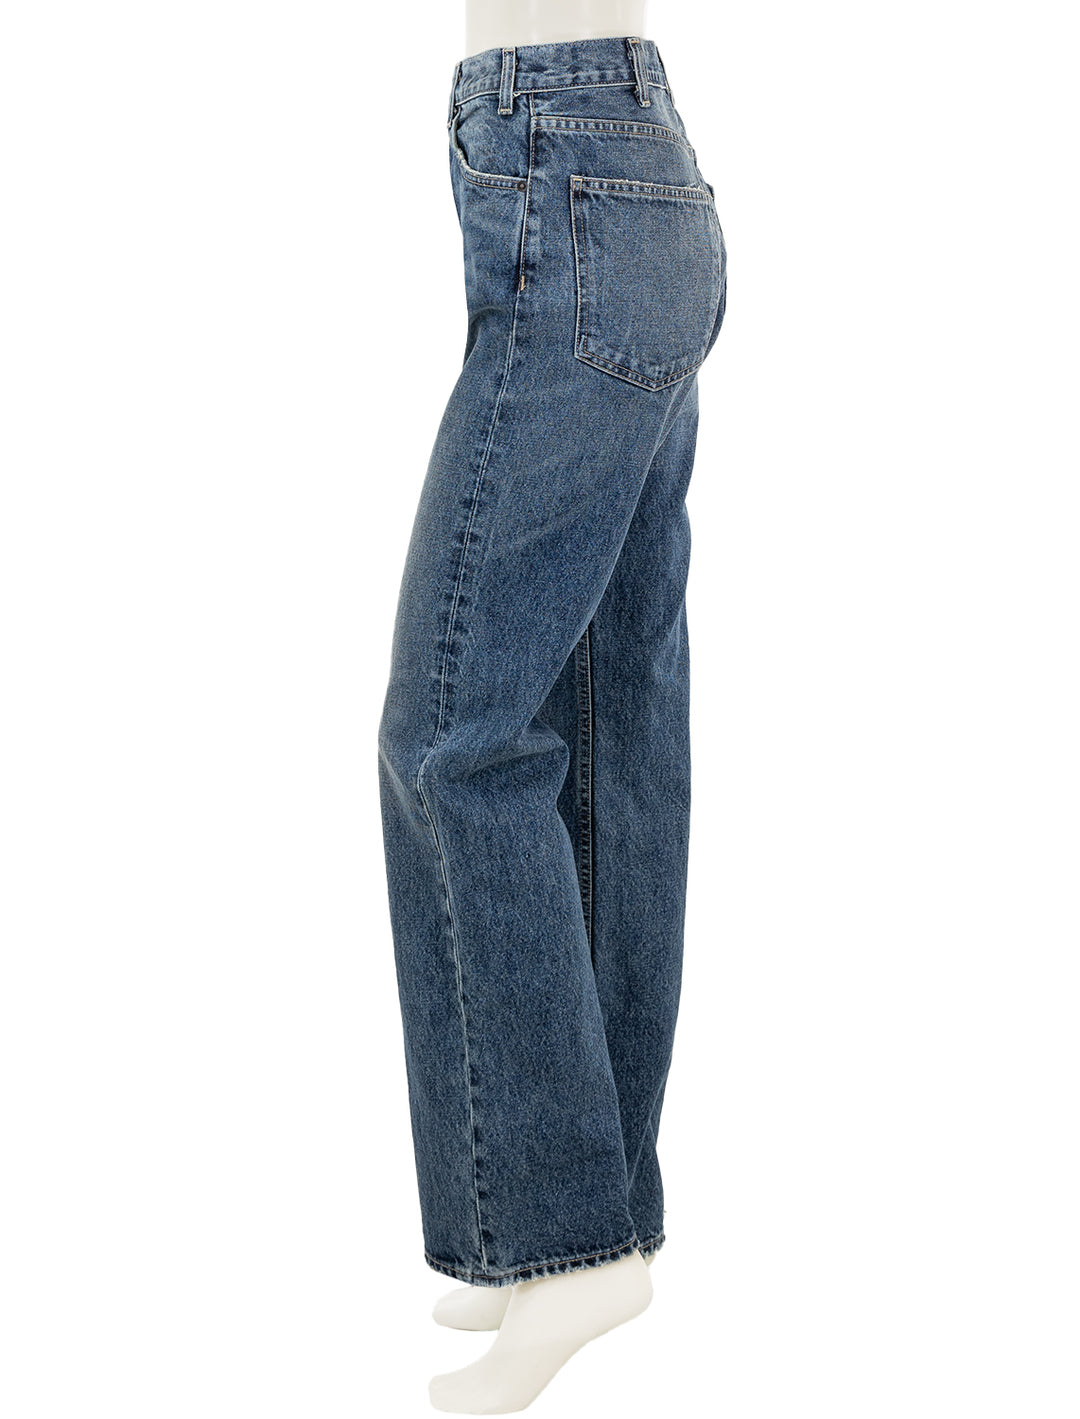 Side view of Nili Lotan's mitchell jean in ocean wash.